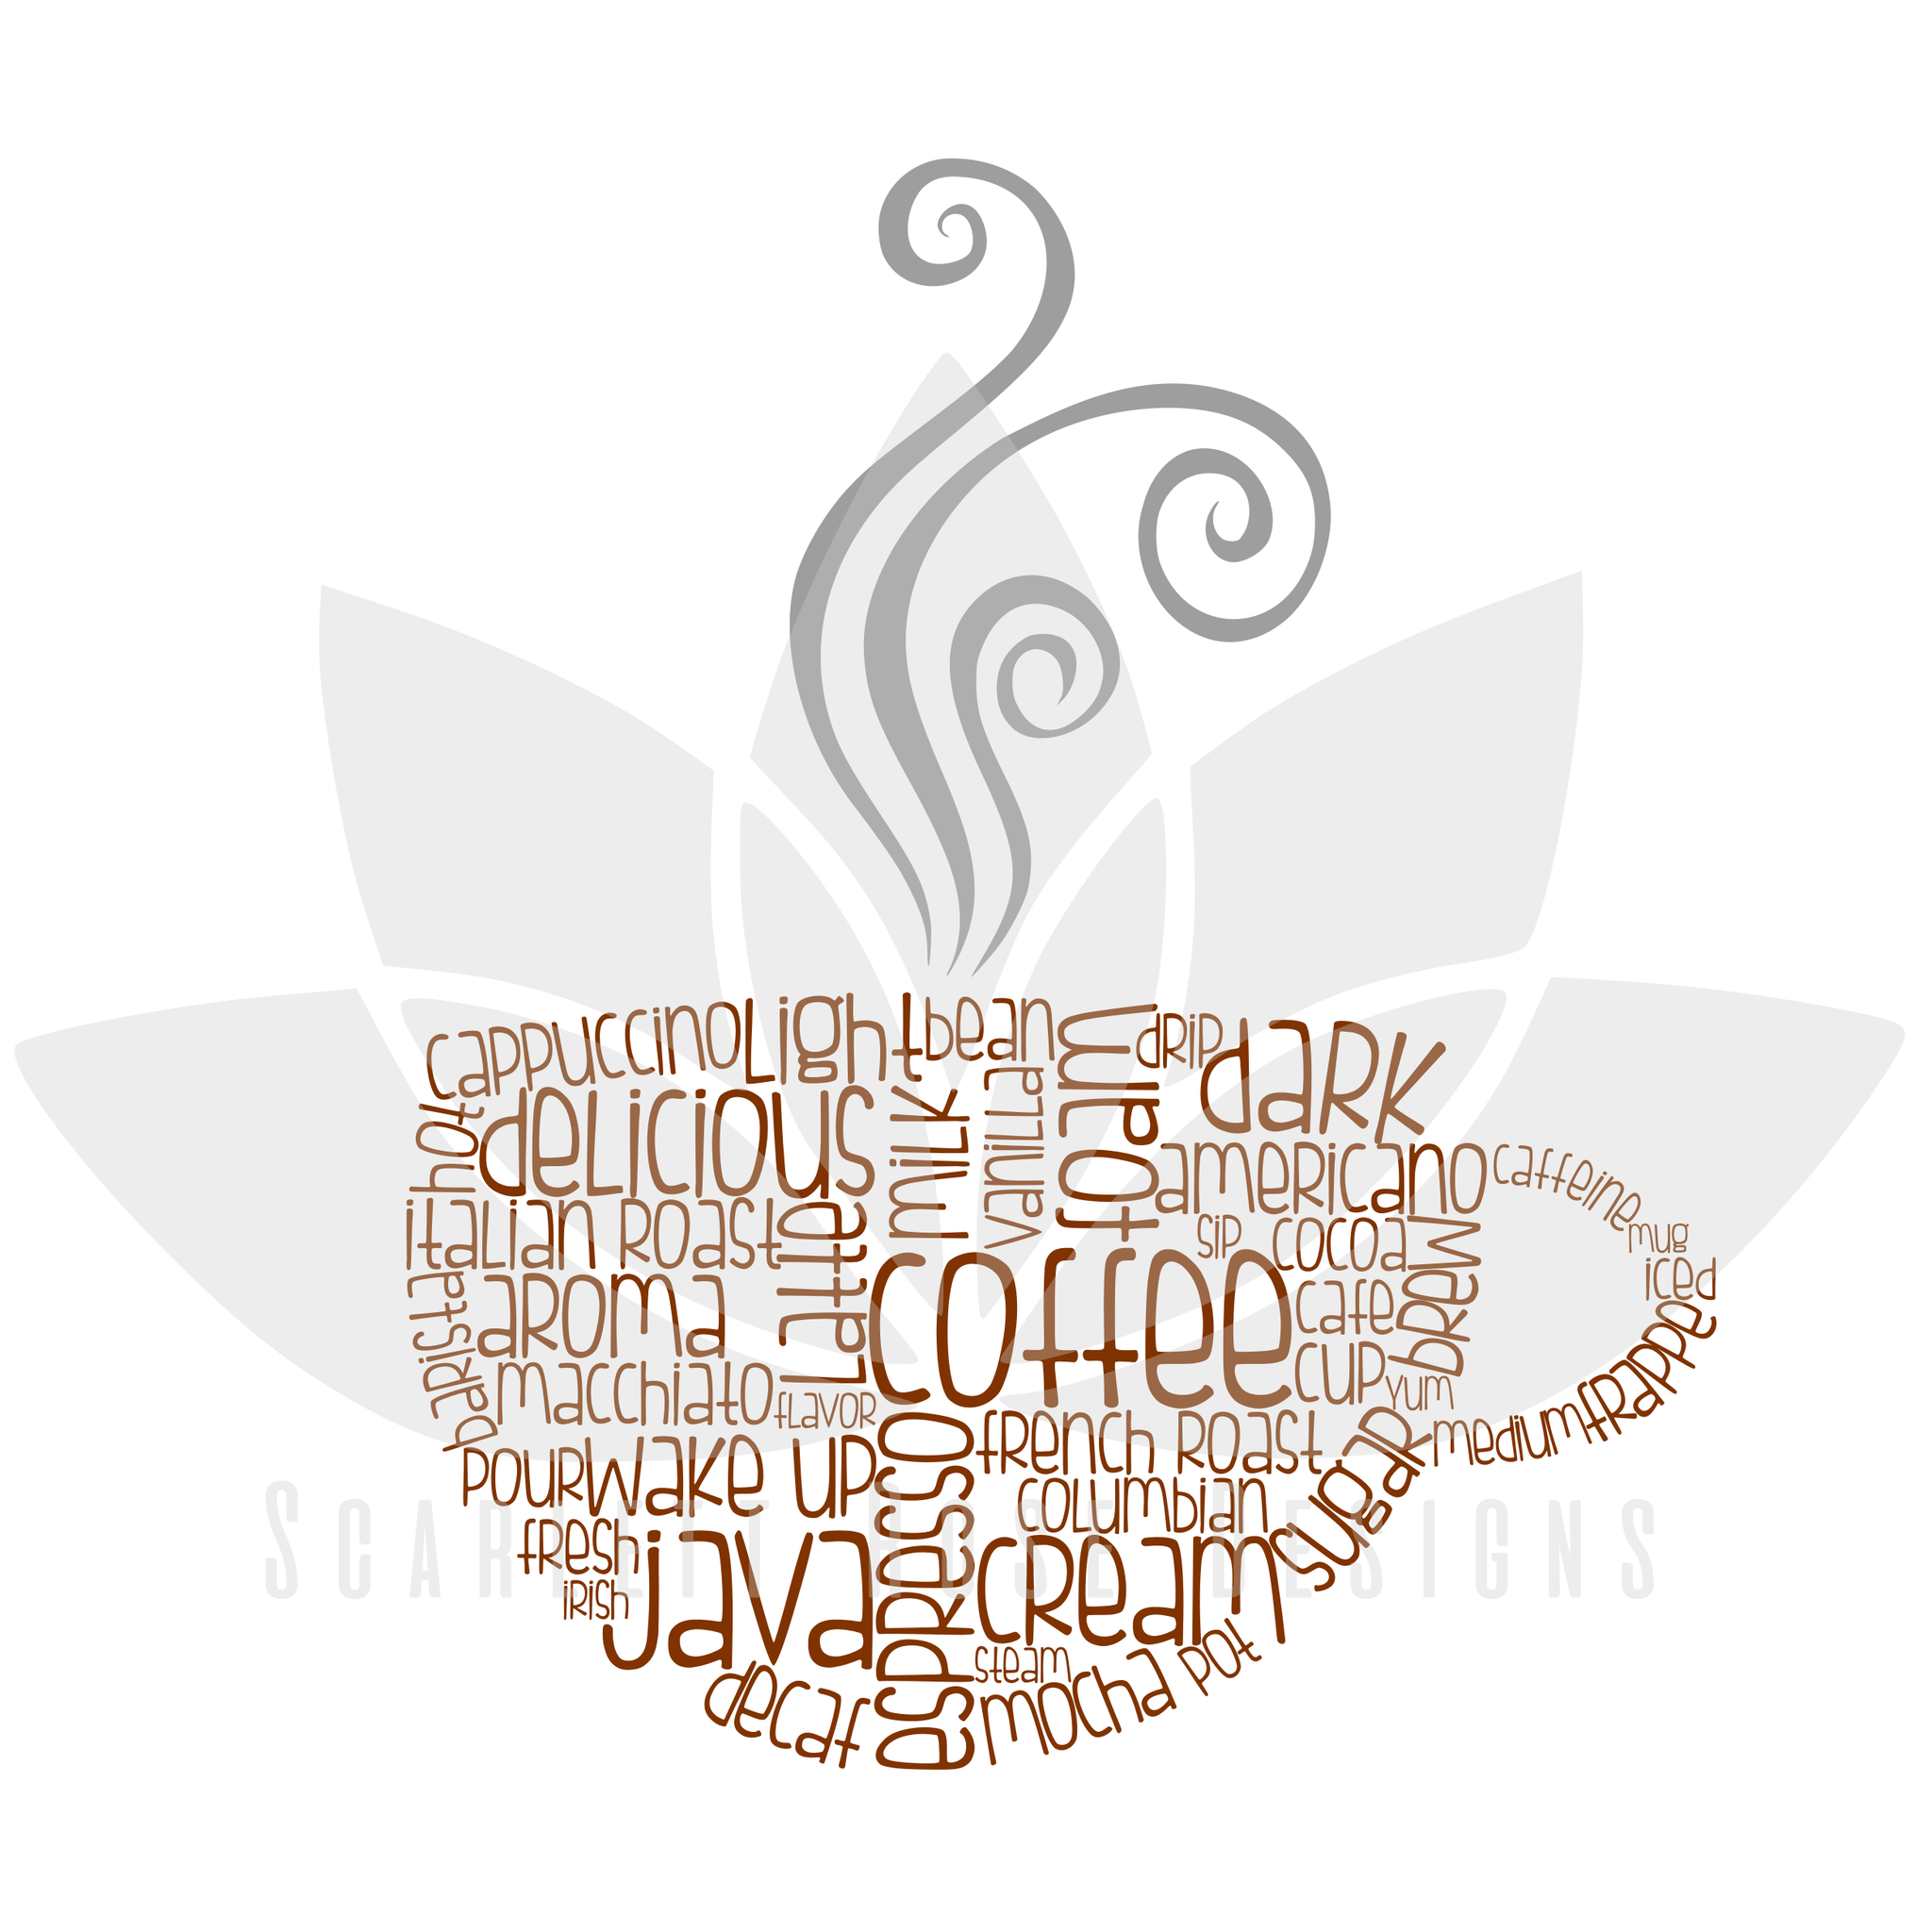 Download Coffee Cup Decor Word Cloud Art SVG cut file, Coffe ...